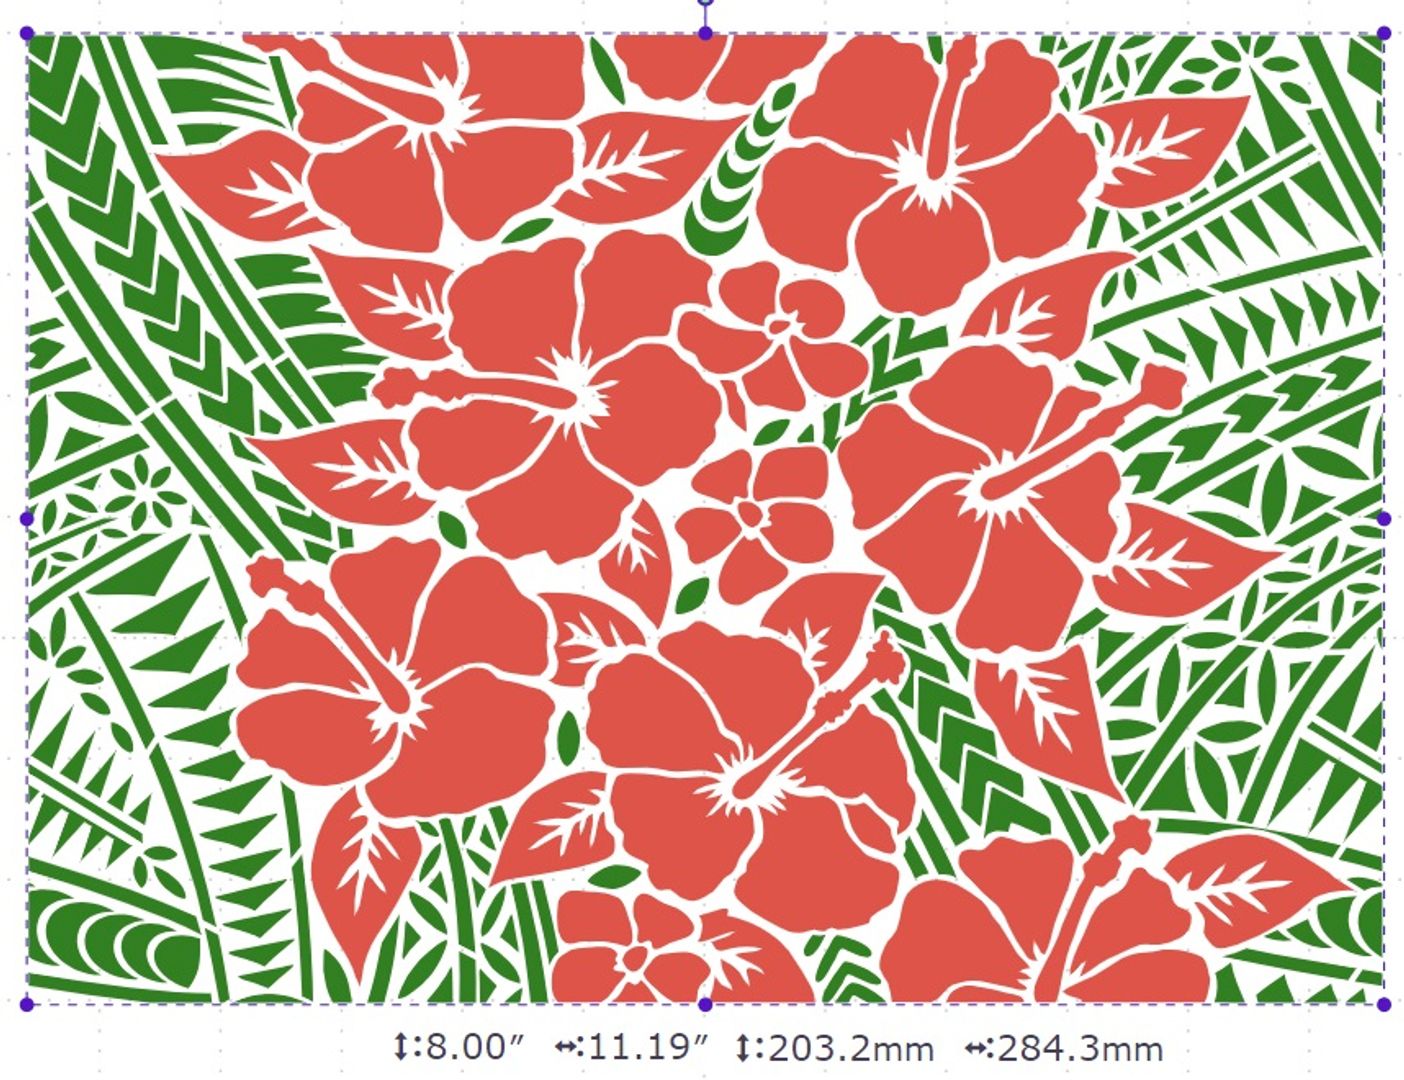 ibicci Hibiscus Polynesian Panel 8" showing the 2 part design